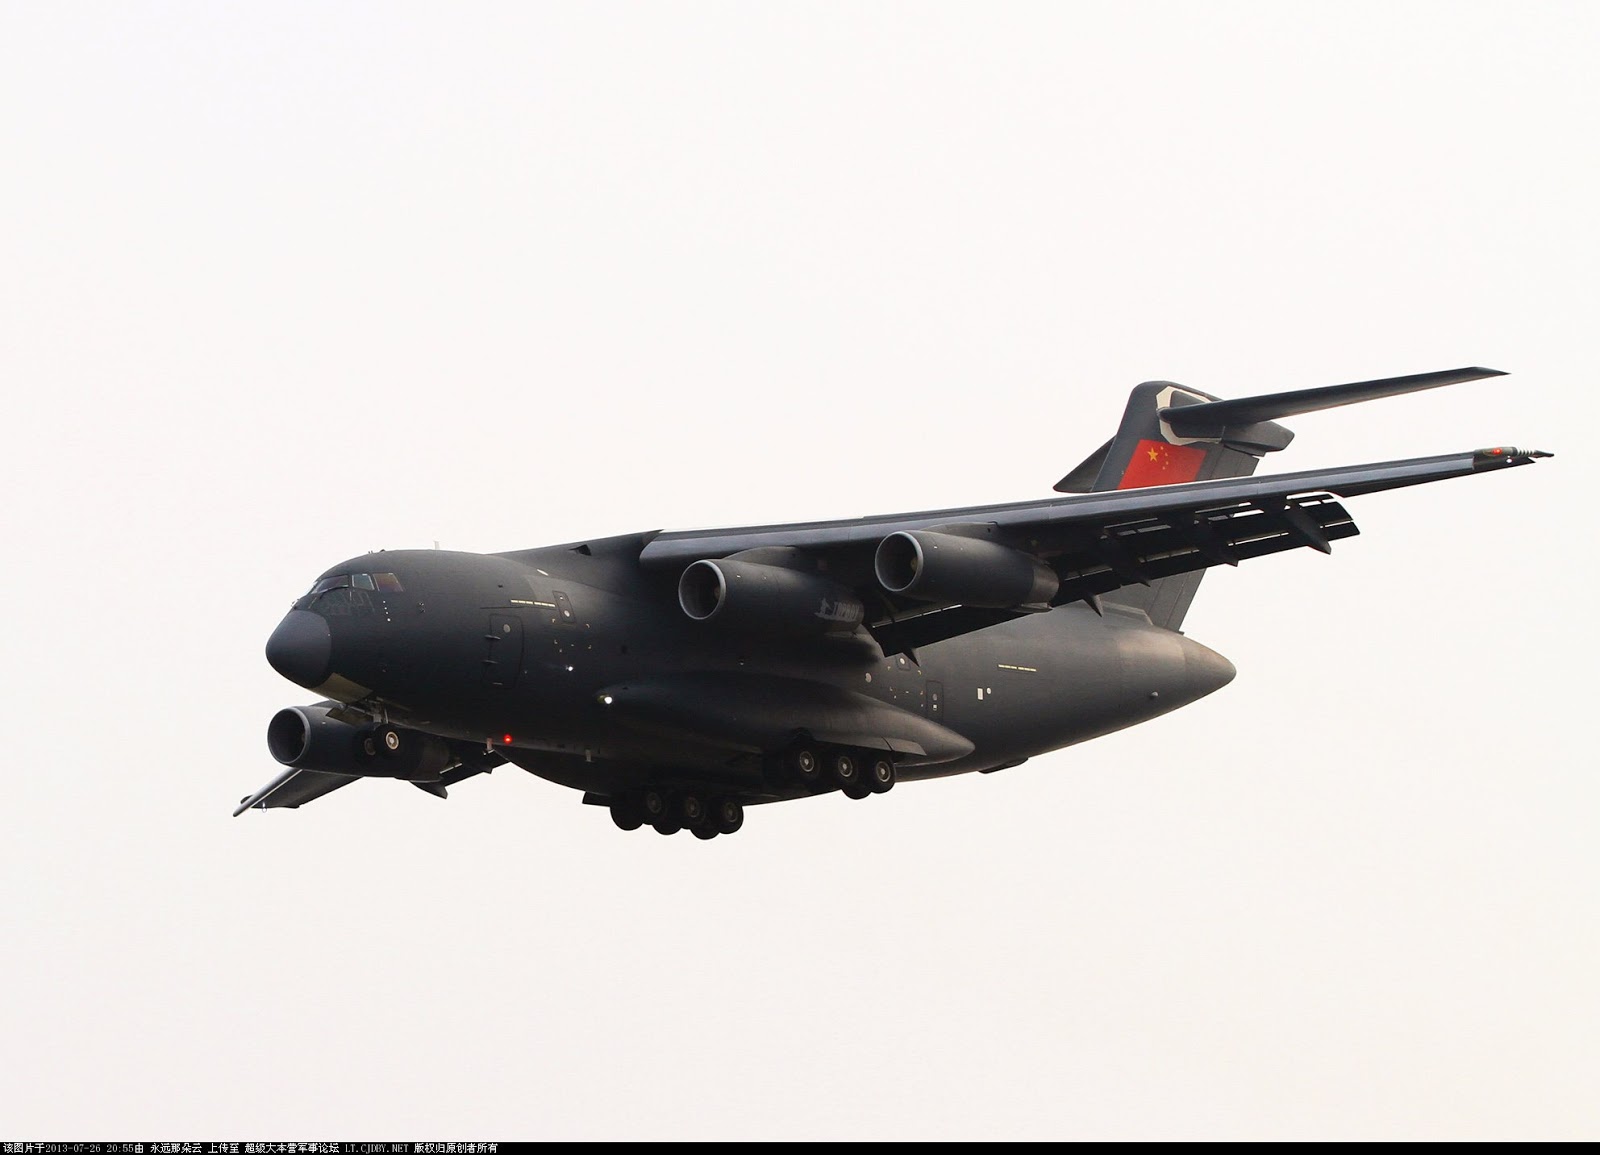  AVIC Y-20 Xian - Página 2 Y-20+China+Future+Military+Transport+Airplane+china+plaaf+air+force+refueling+aewc+aesa+import+flight+taxing+opertional+cgiexport+russia+pakistan+ws10+12+13+15+20+ps90+il-78+73+476+engine+turbofan++(2)